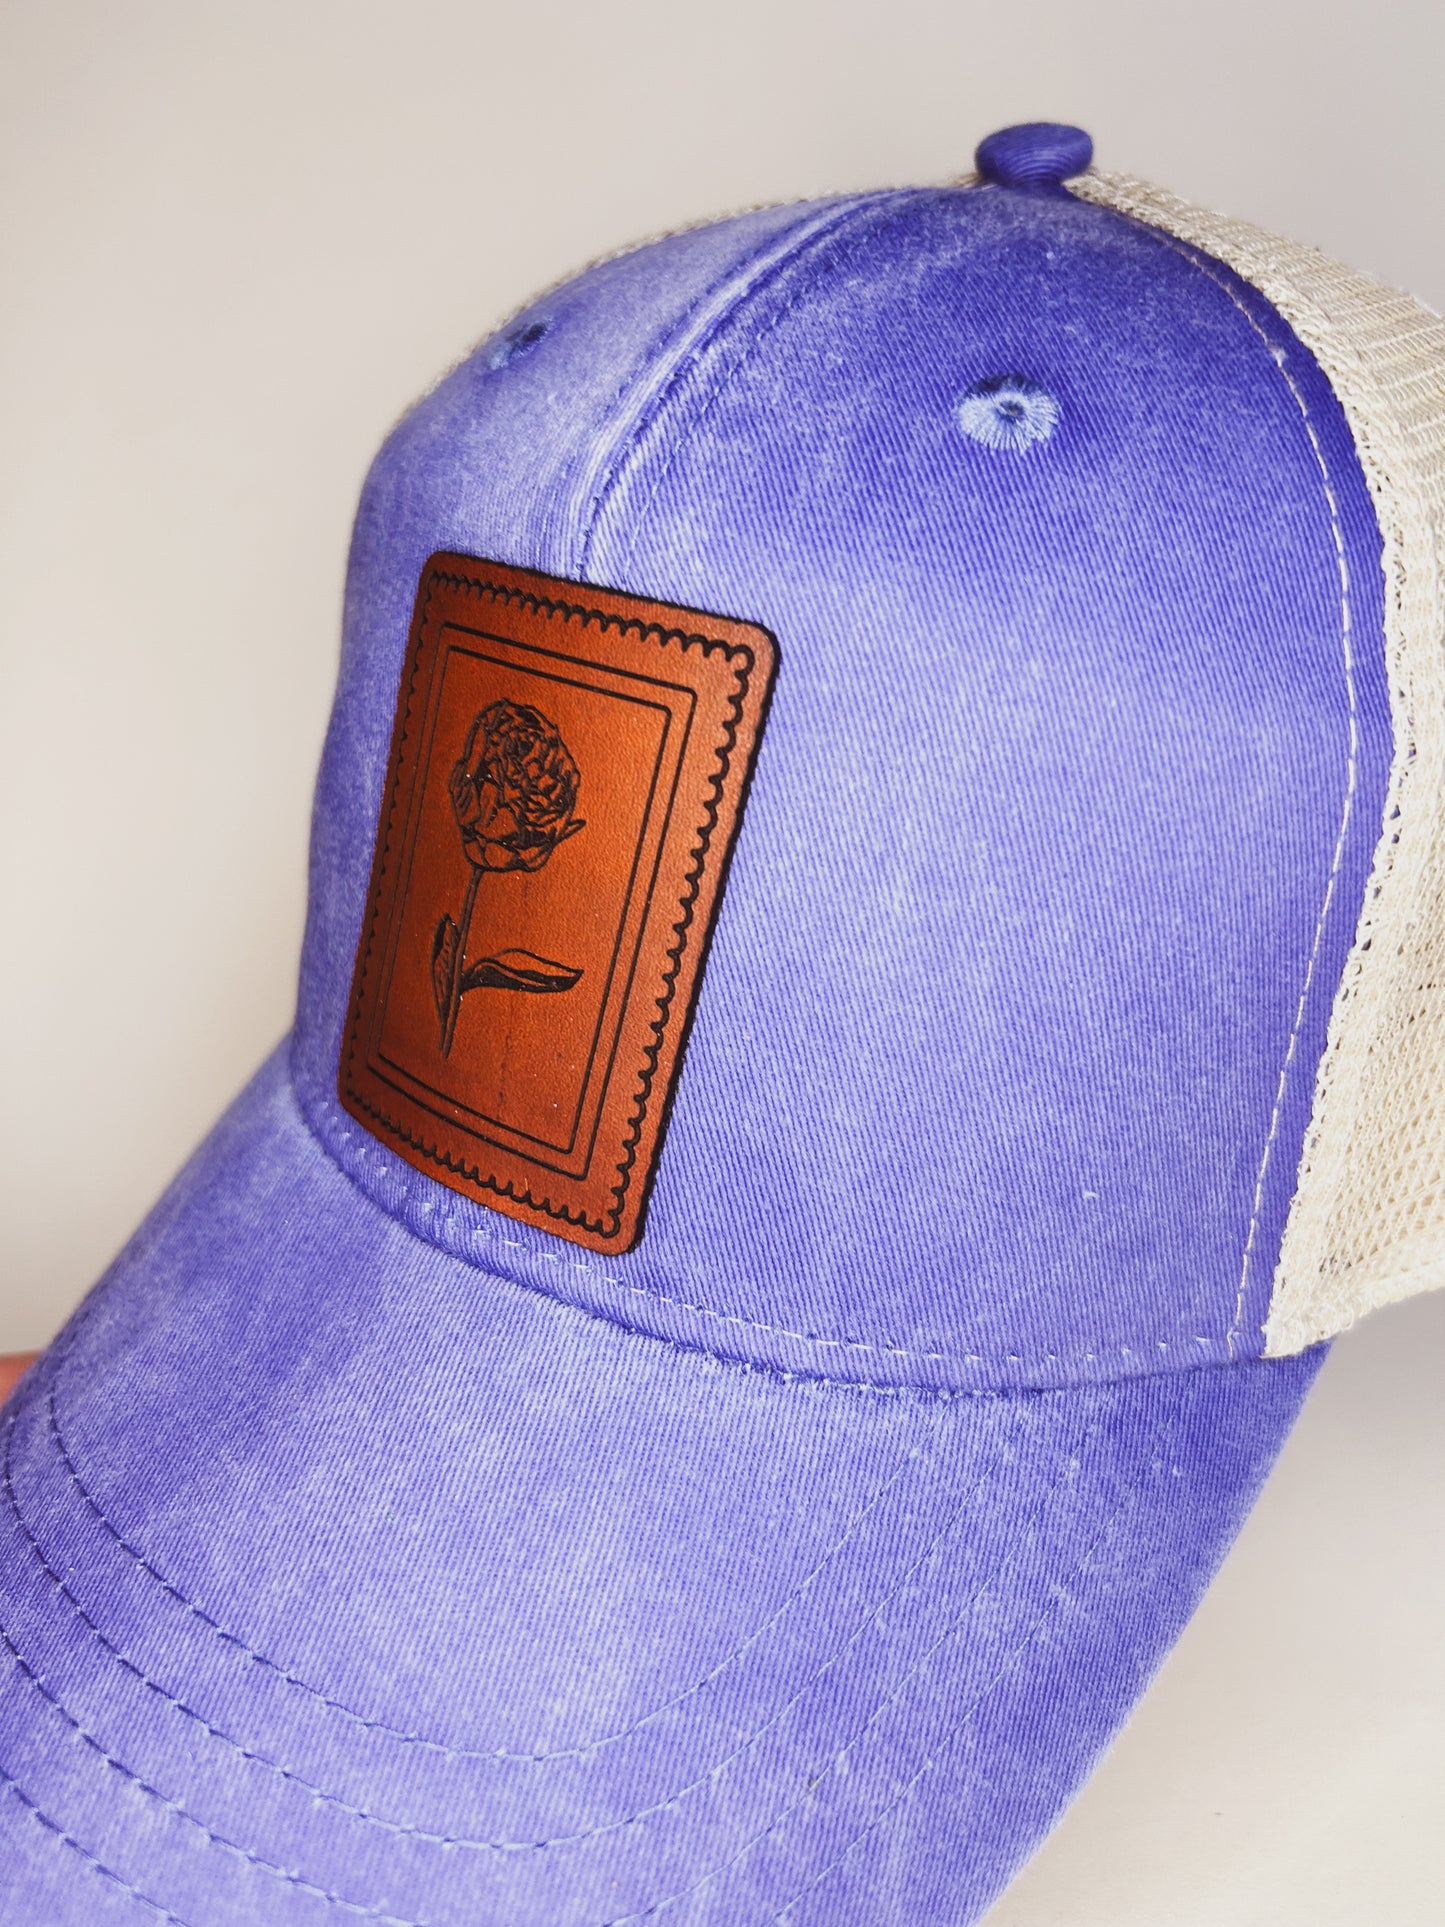 Vintage Peony Stamp Leather Patch Hat - Blue Hat